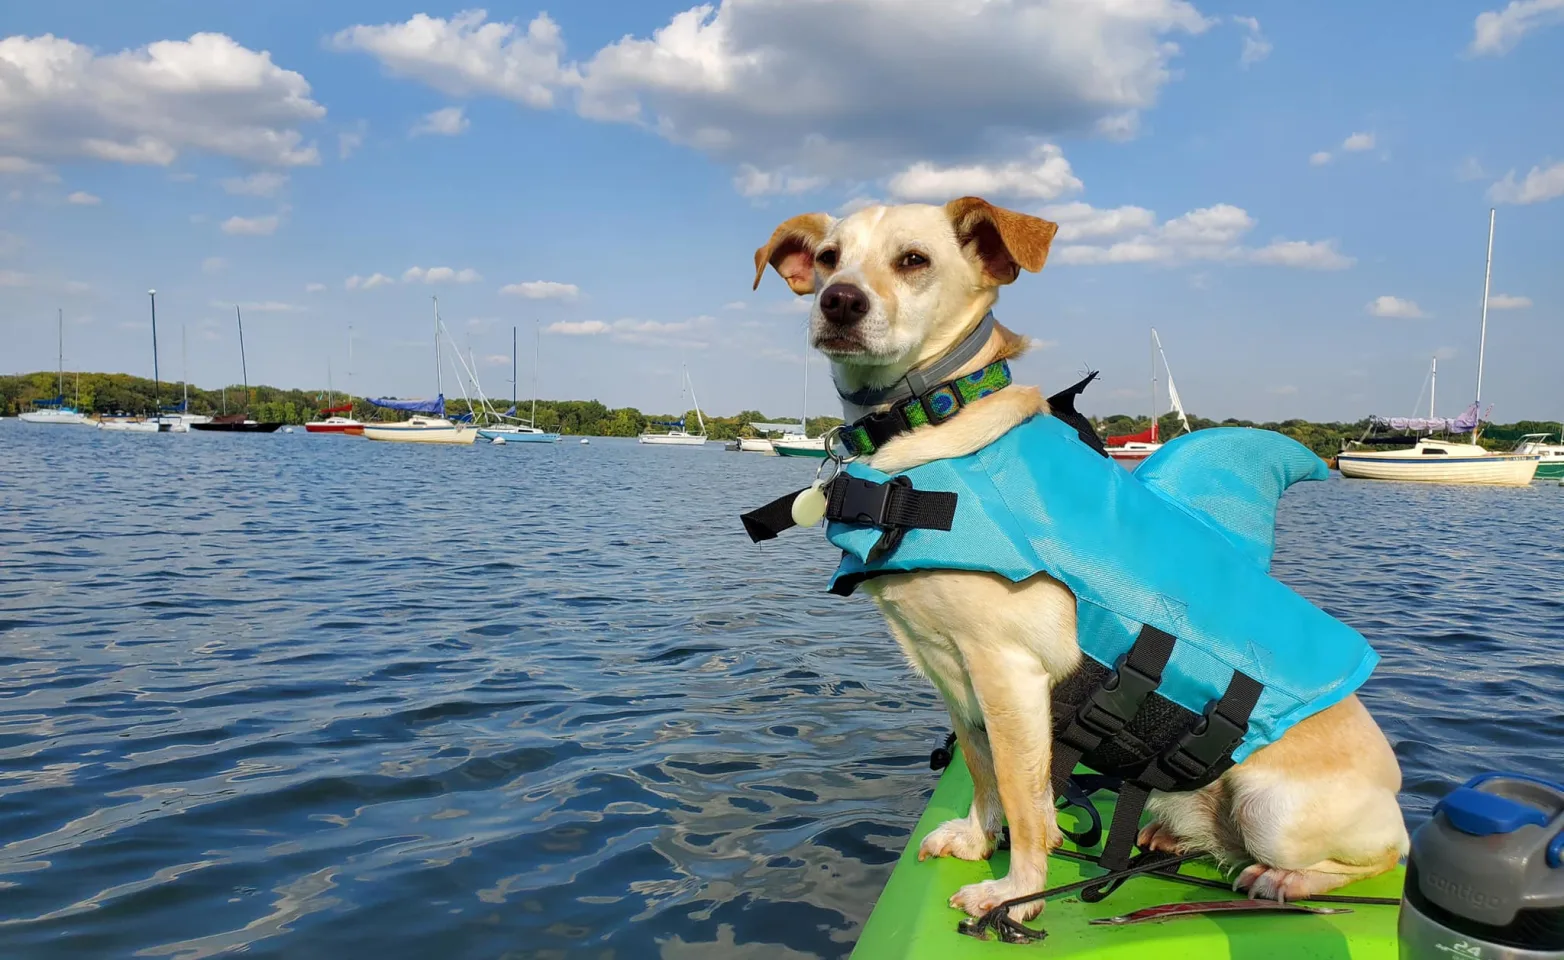 Small dog sitting on a kayak in the water wearing a life jacket